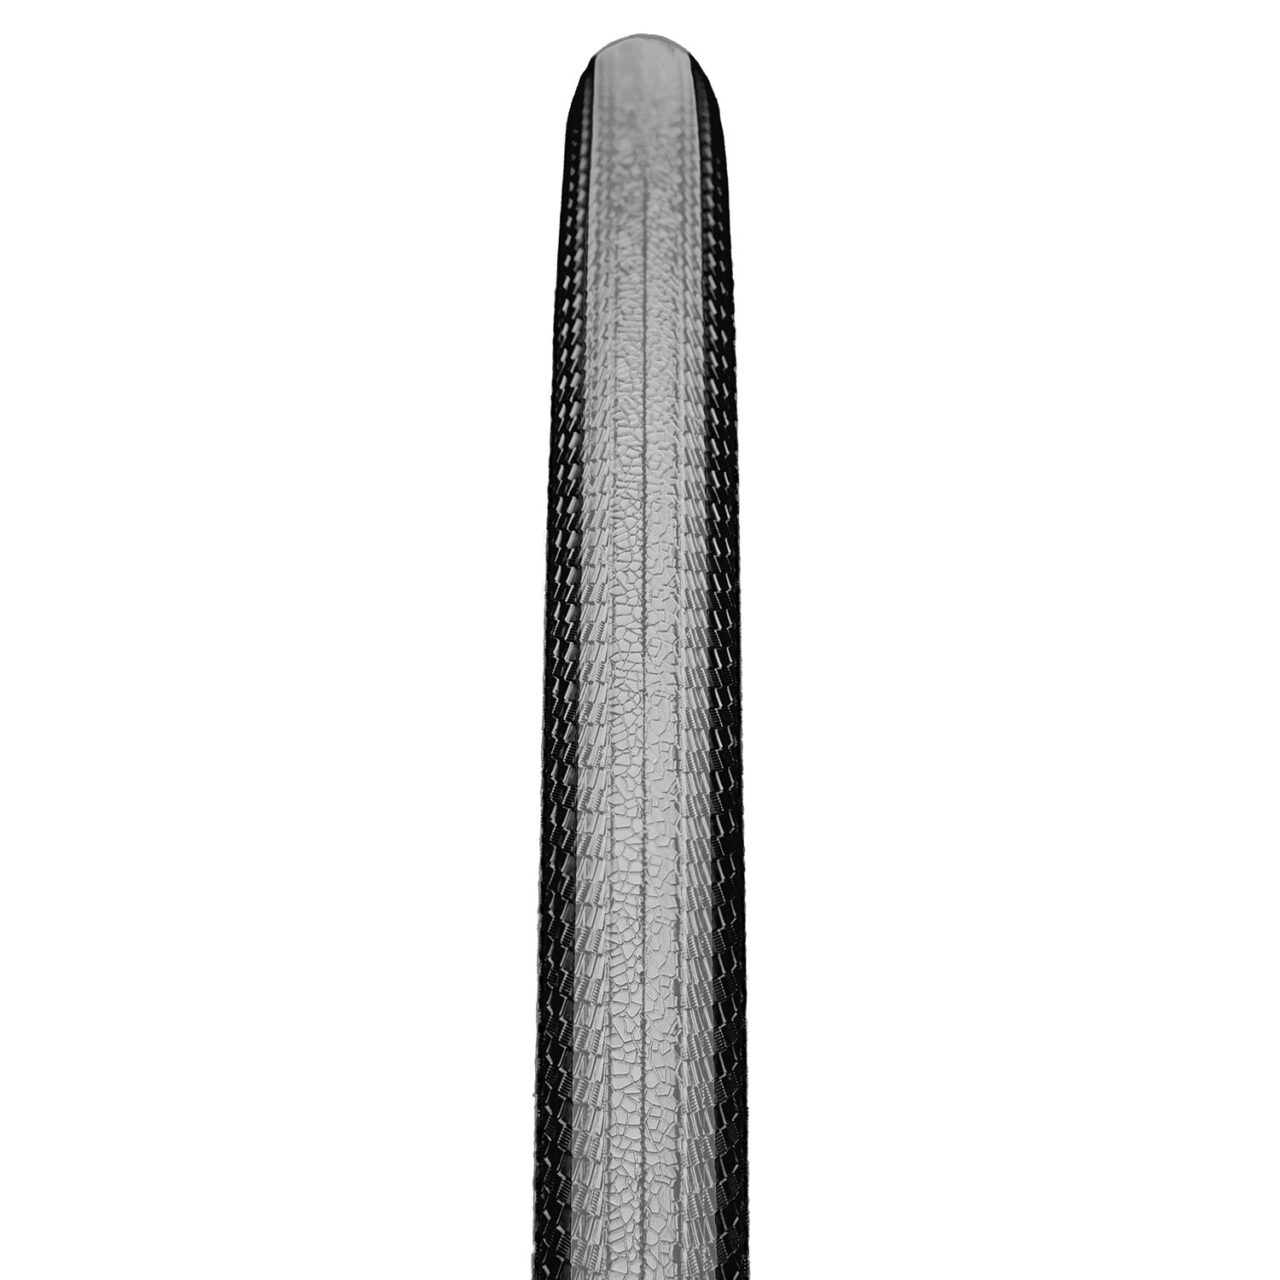 Maxxis Relix TT bicycle tire